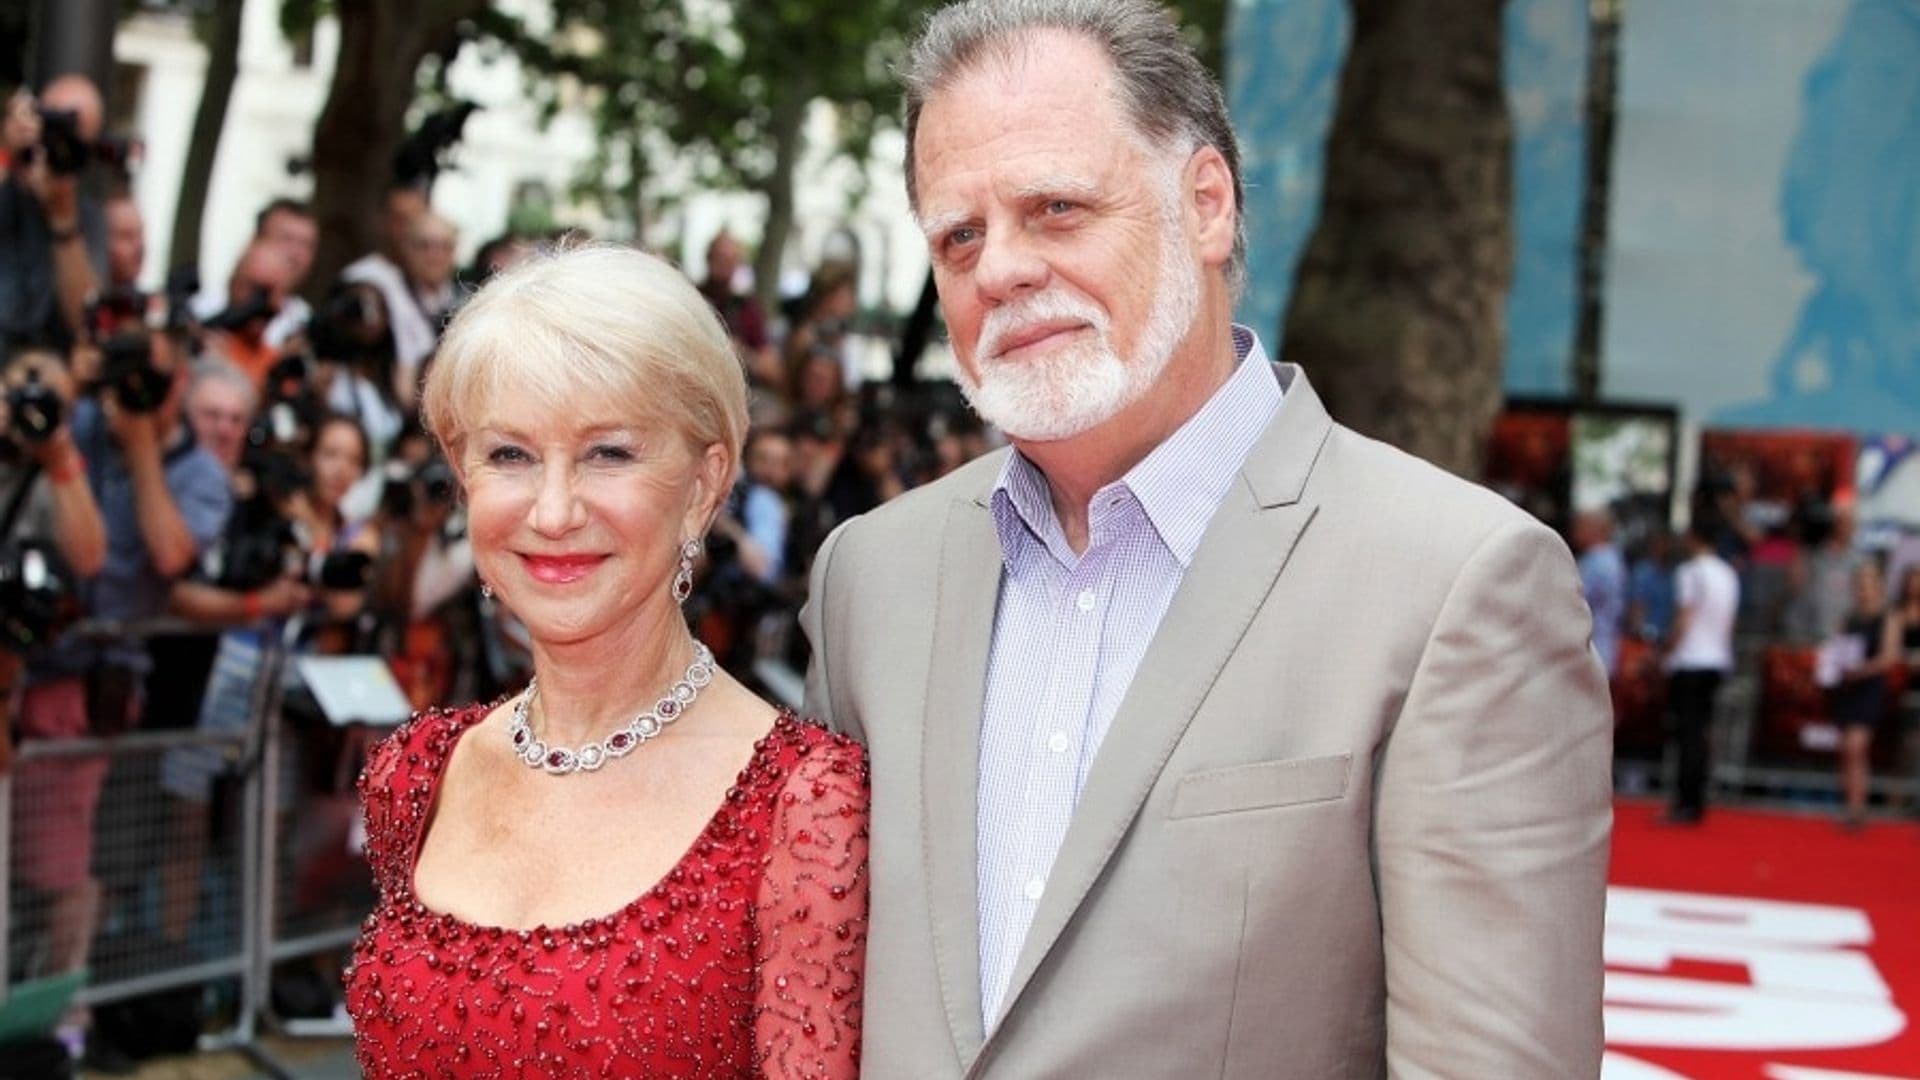 Helen Mirren on the one thing that 'drives her crazy' about her husband Taylor Hackford